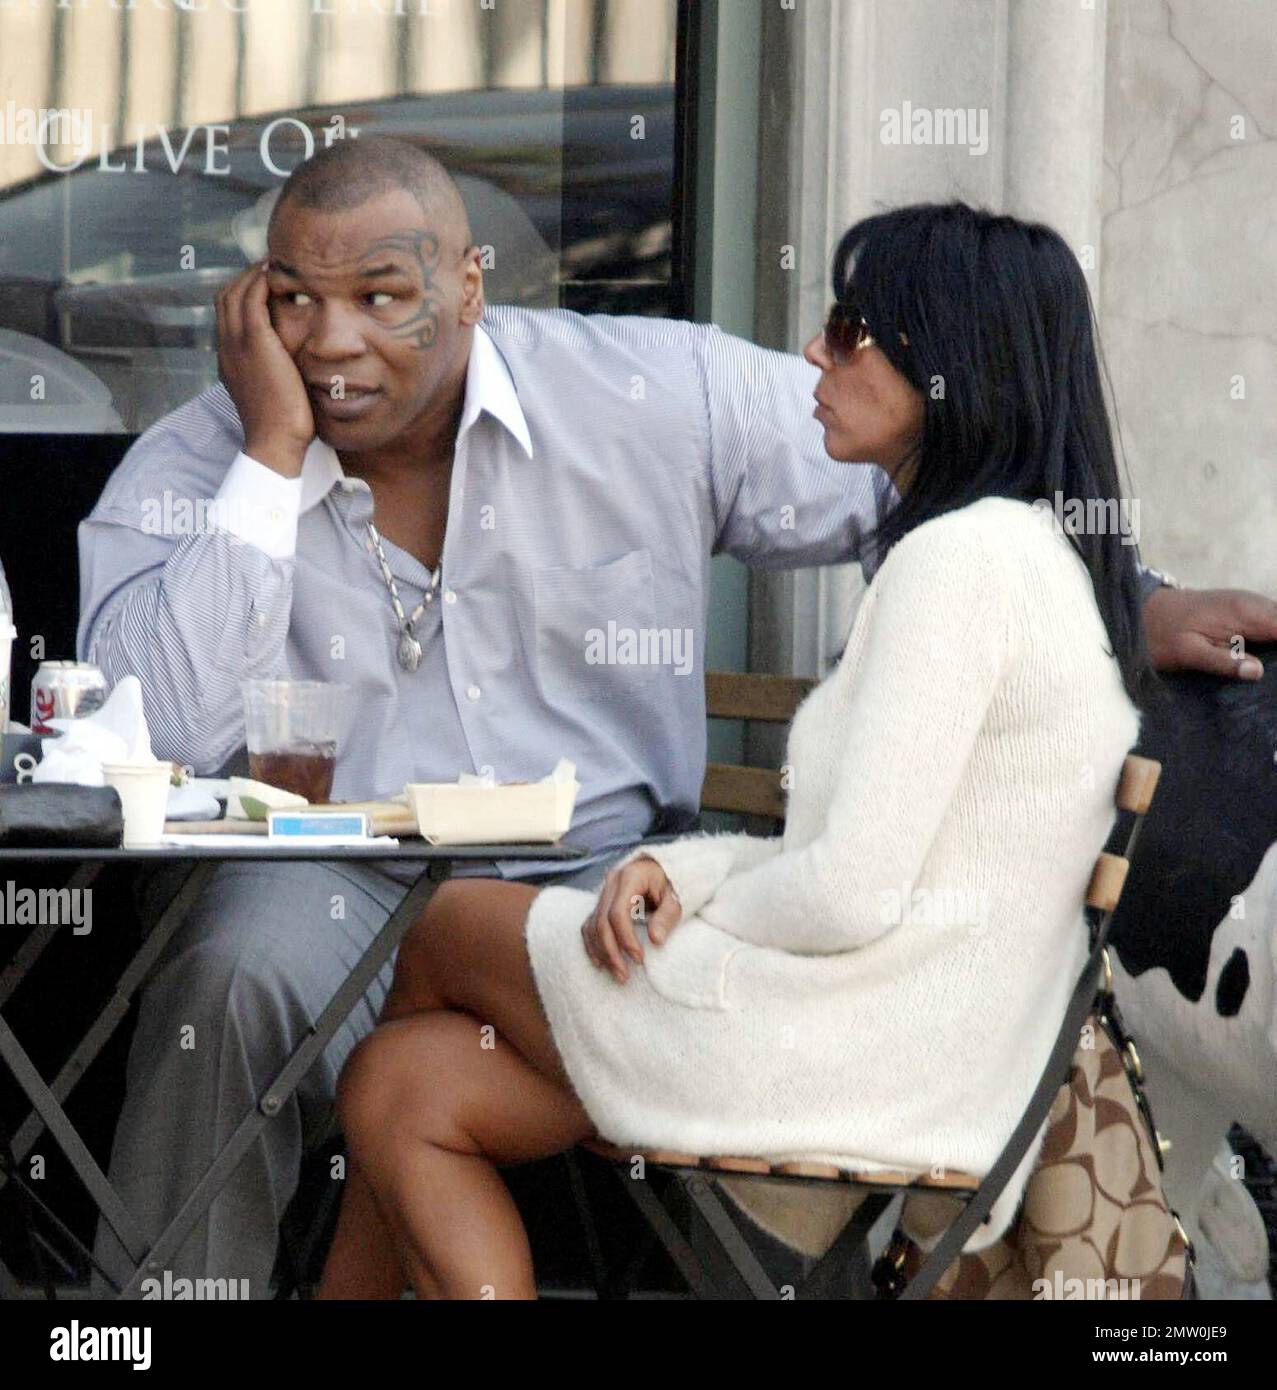 Mike Tyson lunches with two female friends at Joans On Third. Tyson is reportedly in talks for a potential third boxing rematch with Evander Holyfield. Tyson was disqualified during their last bout in 1997 when Tyson  took a bite out Holyfield's ear. Los Angeles, Ca. 3/5/08. Stock Photo